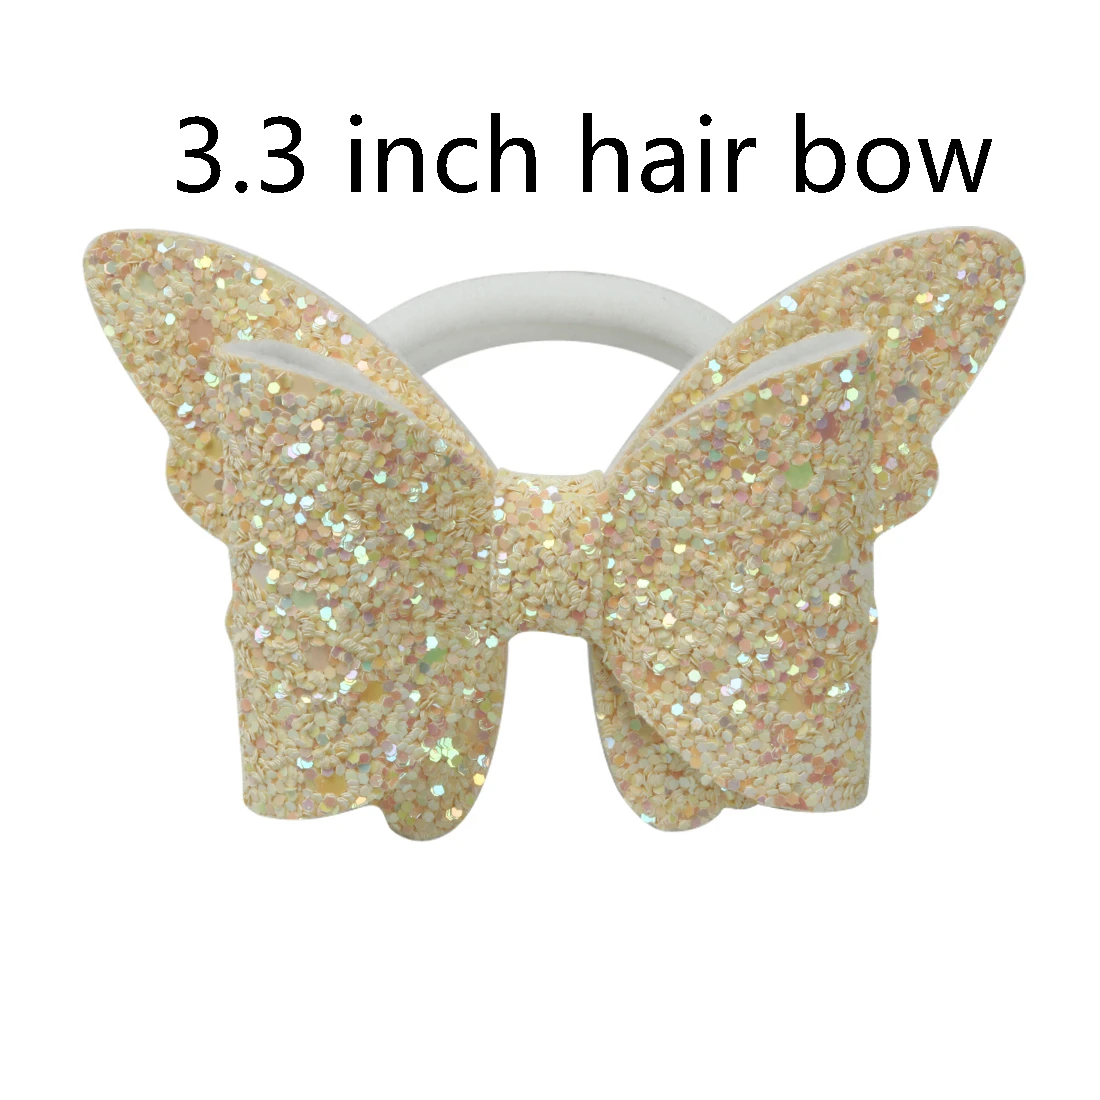 1 PC Child Hair Bow Tie Elastic Hair Band Glitter Hairbow Rope Rainbow Sequin Sparkly 3 Inch Bows Mermaid Girls Sweet Headwear - Цвет: butterfly-4